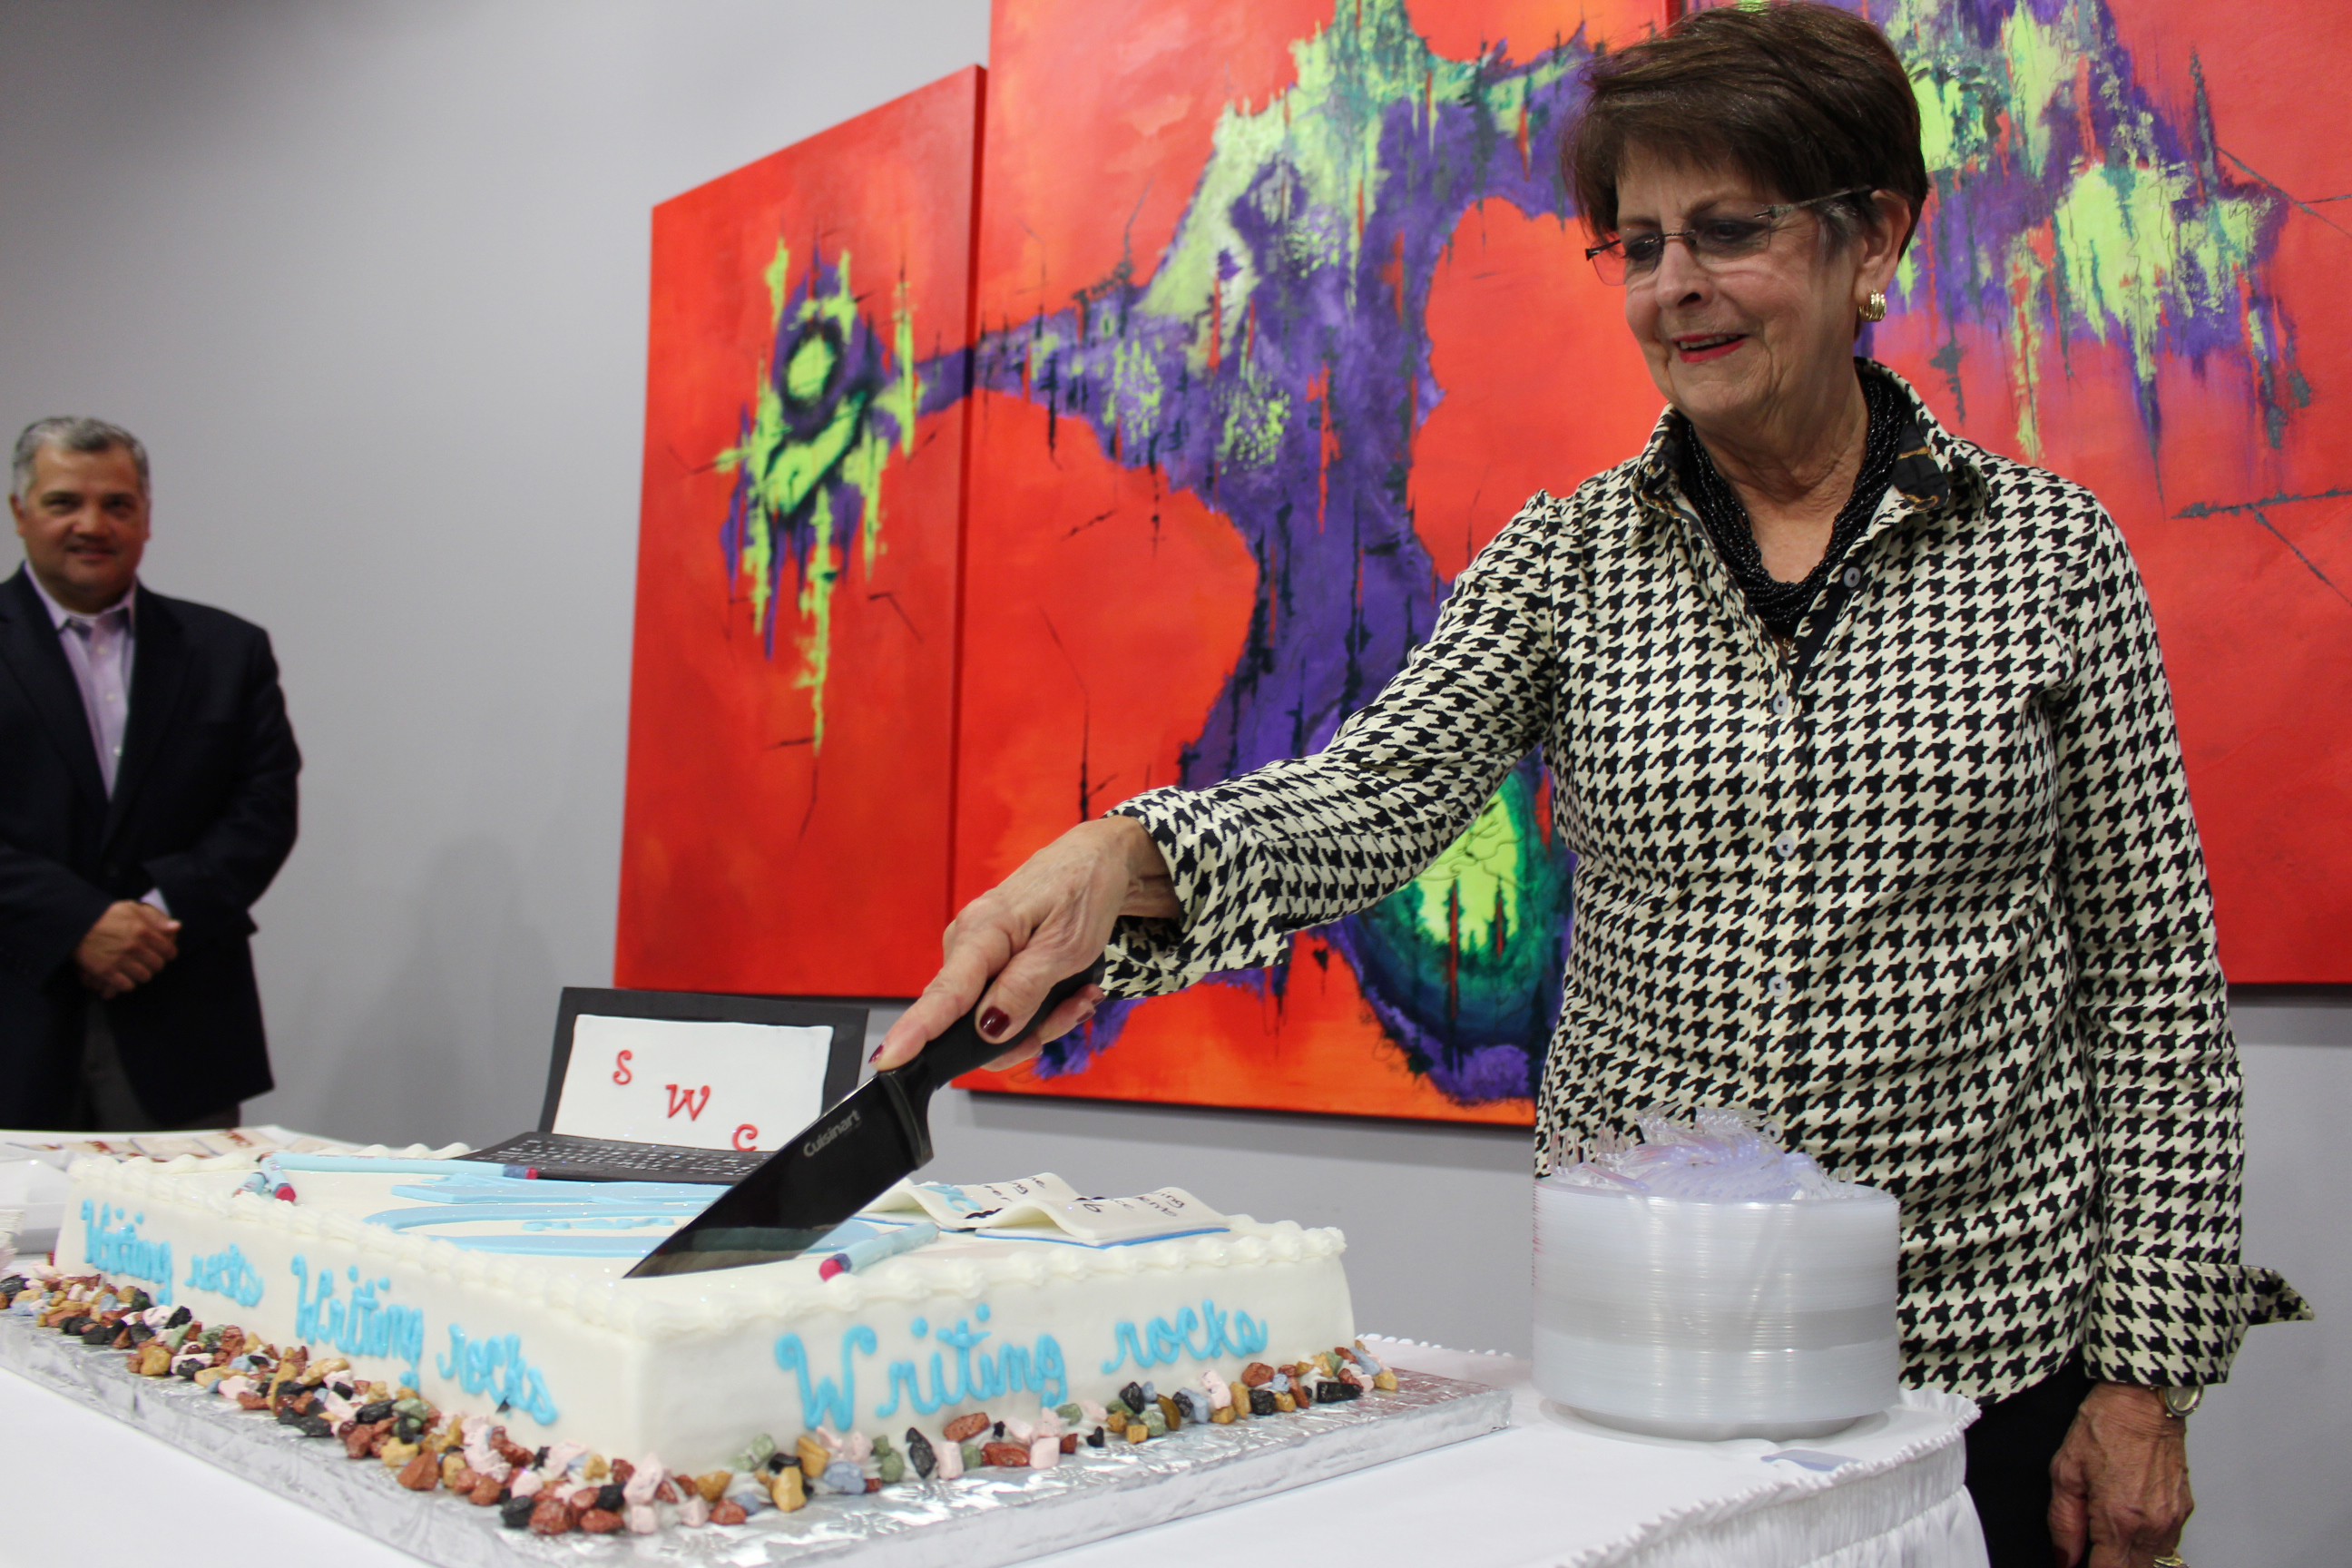 Kay Stone Land as a honored guest cuts the cake at Stone Writing Center's "40" Celebration.